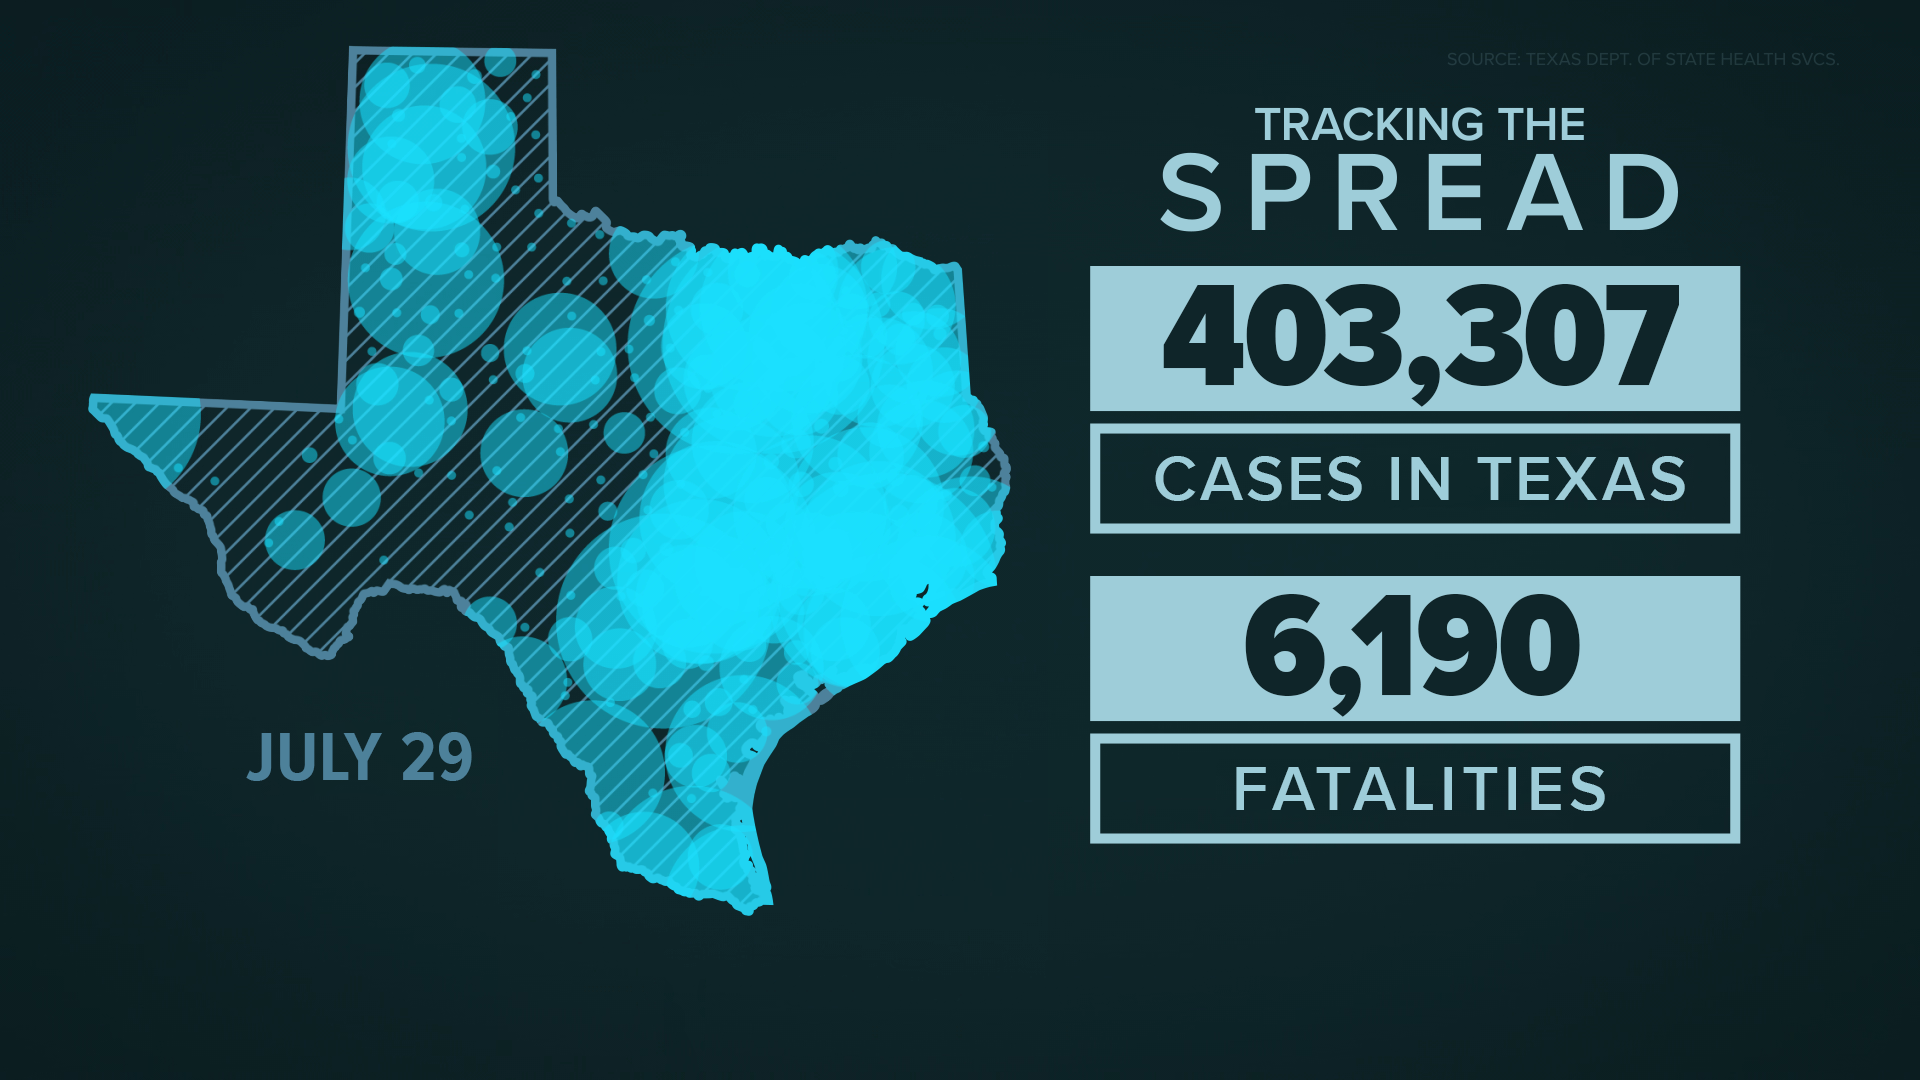 The state reported 9,042 new COVID-19 cases on Wednesday, bringing the state total to 403,307 total cases in Texas.